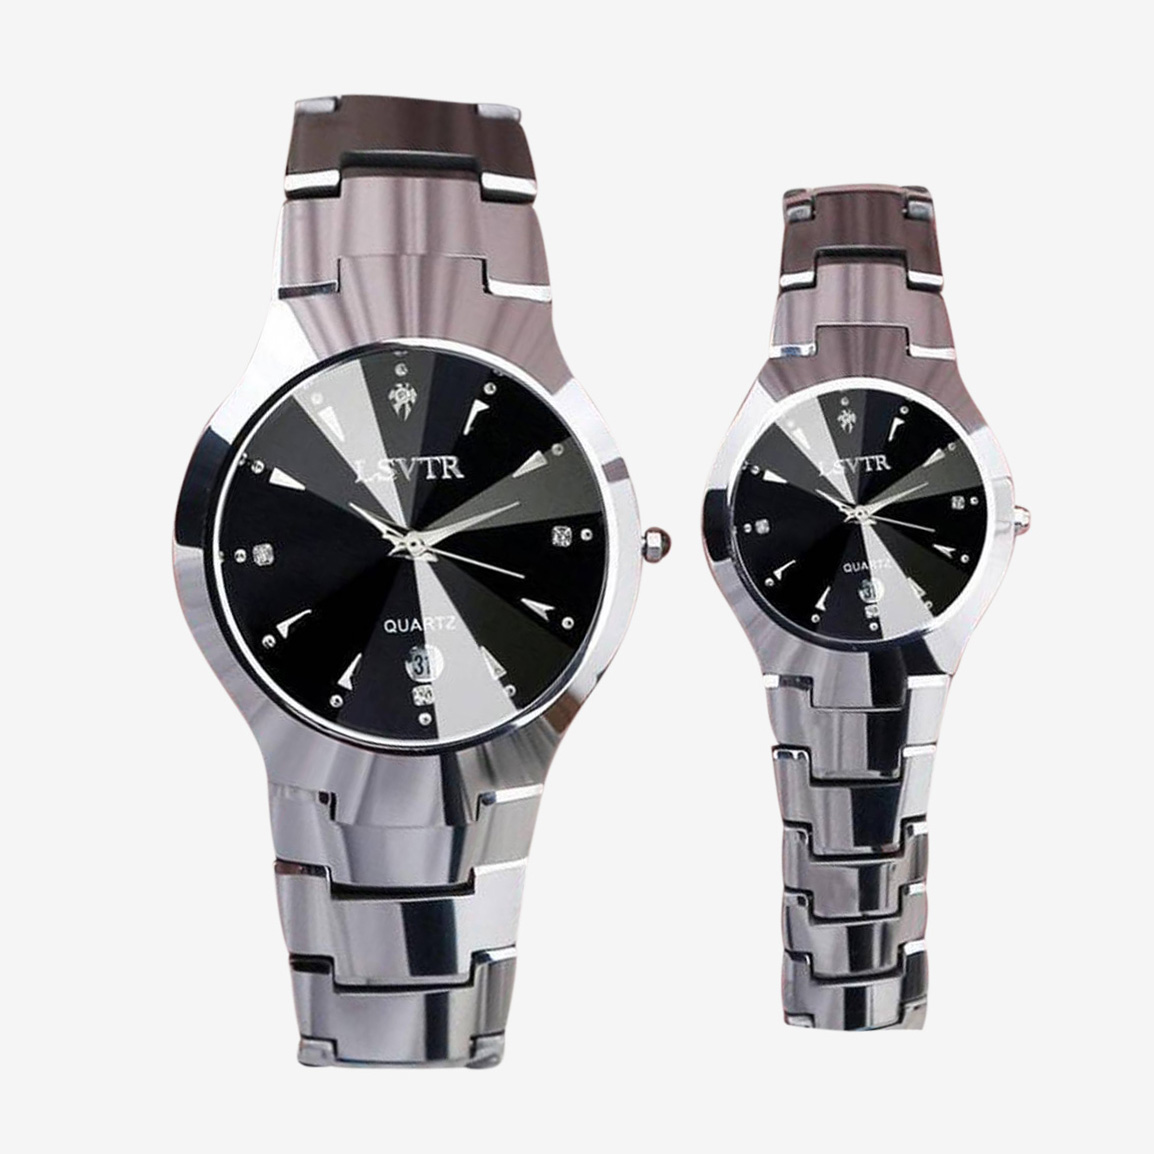 2019 LSVTR Women Watches Top Brand Classic Fashion Square Quartz Watch  Leather Strap Ladies Watches Drop224J From Fwool88, $13.22 | DHgate.Com